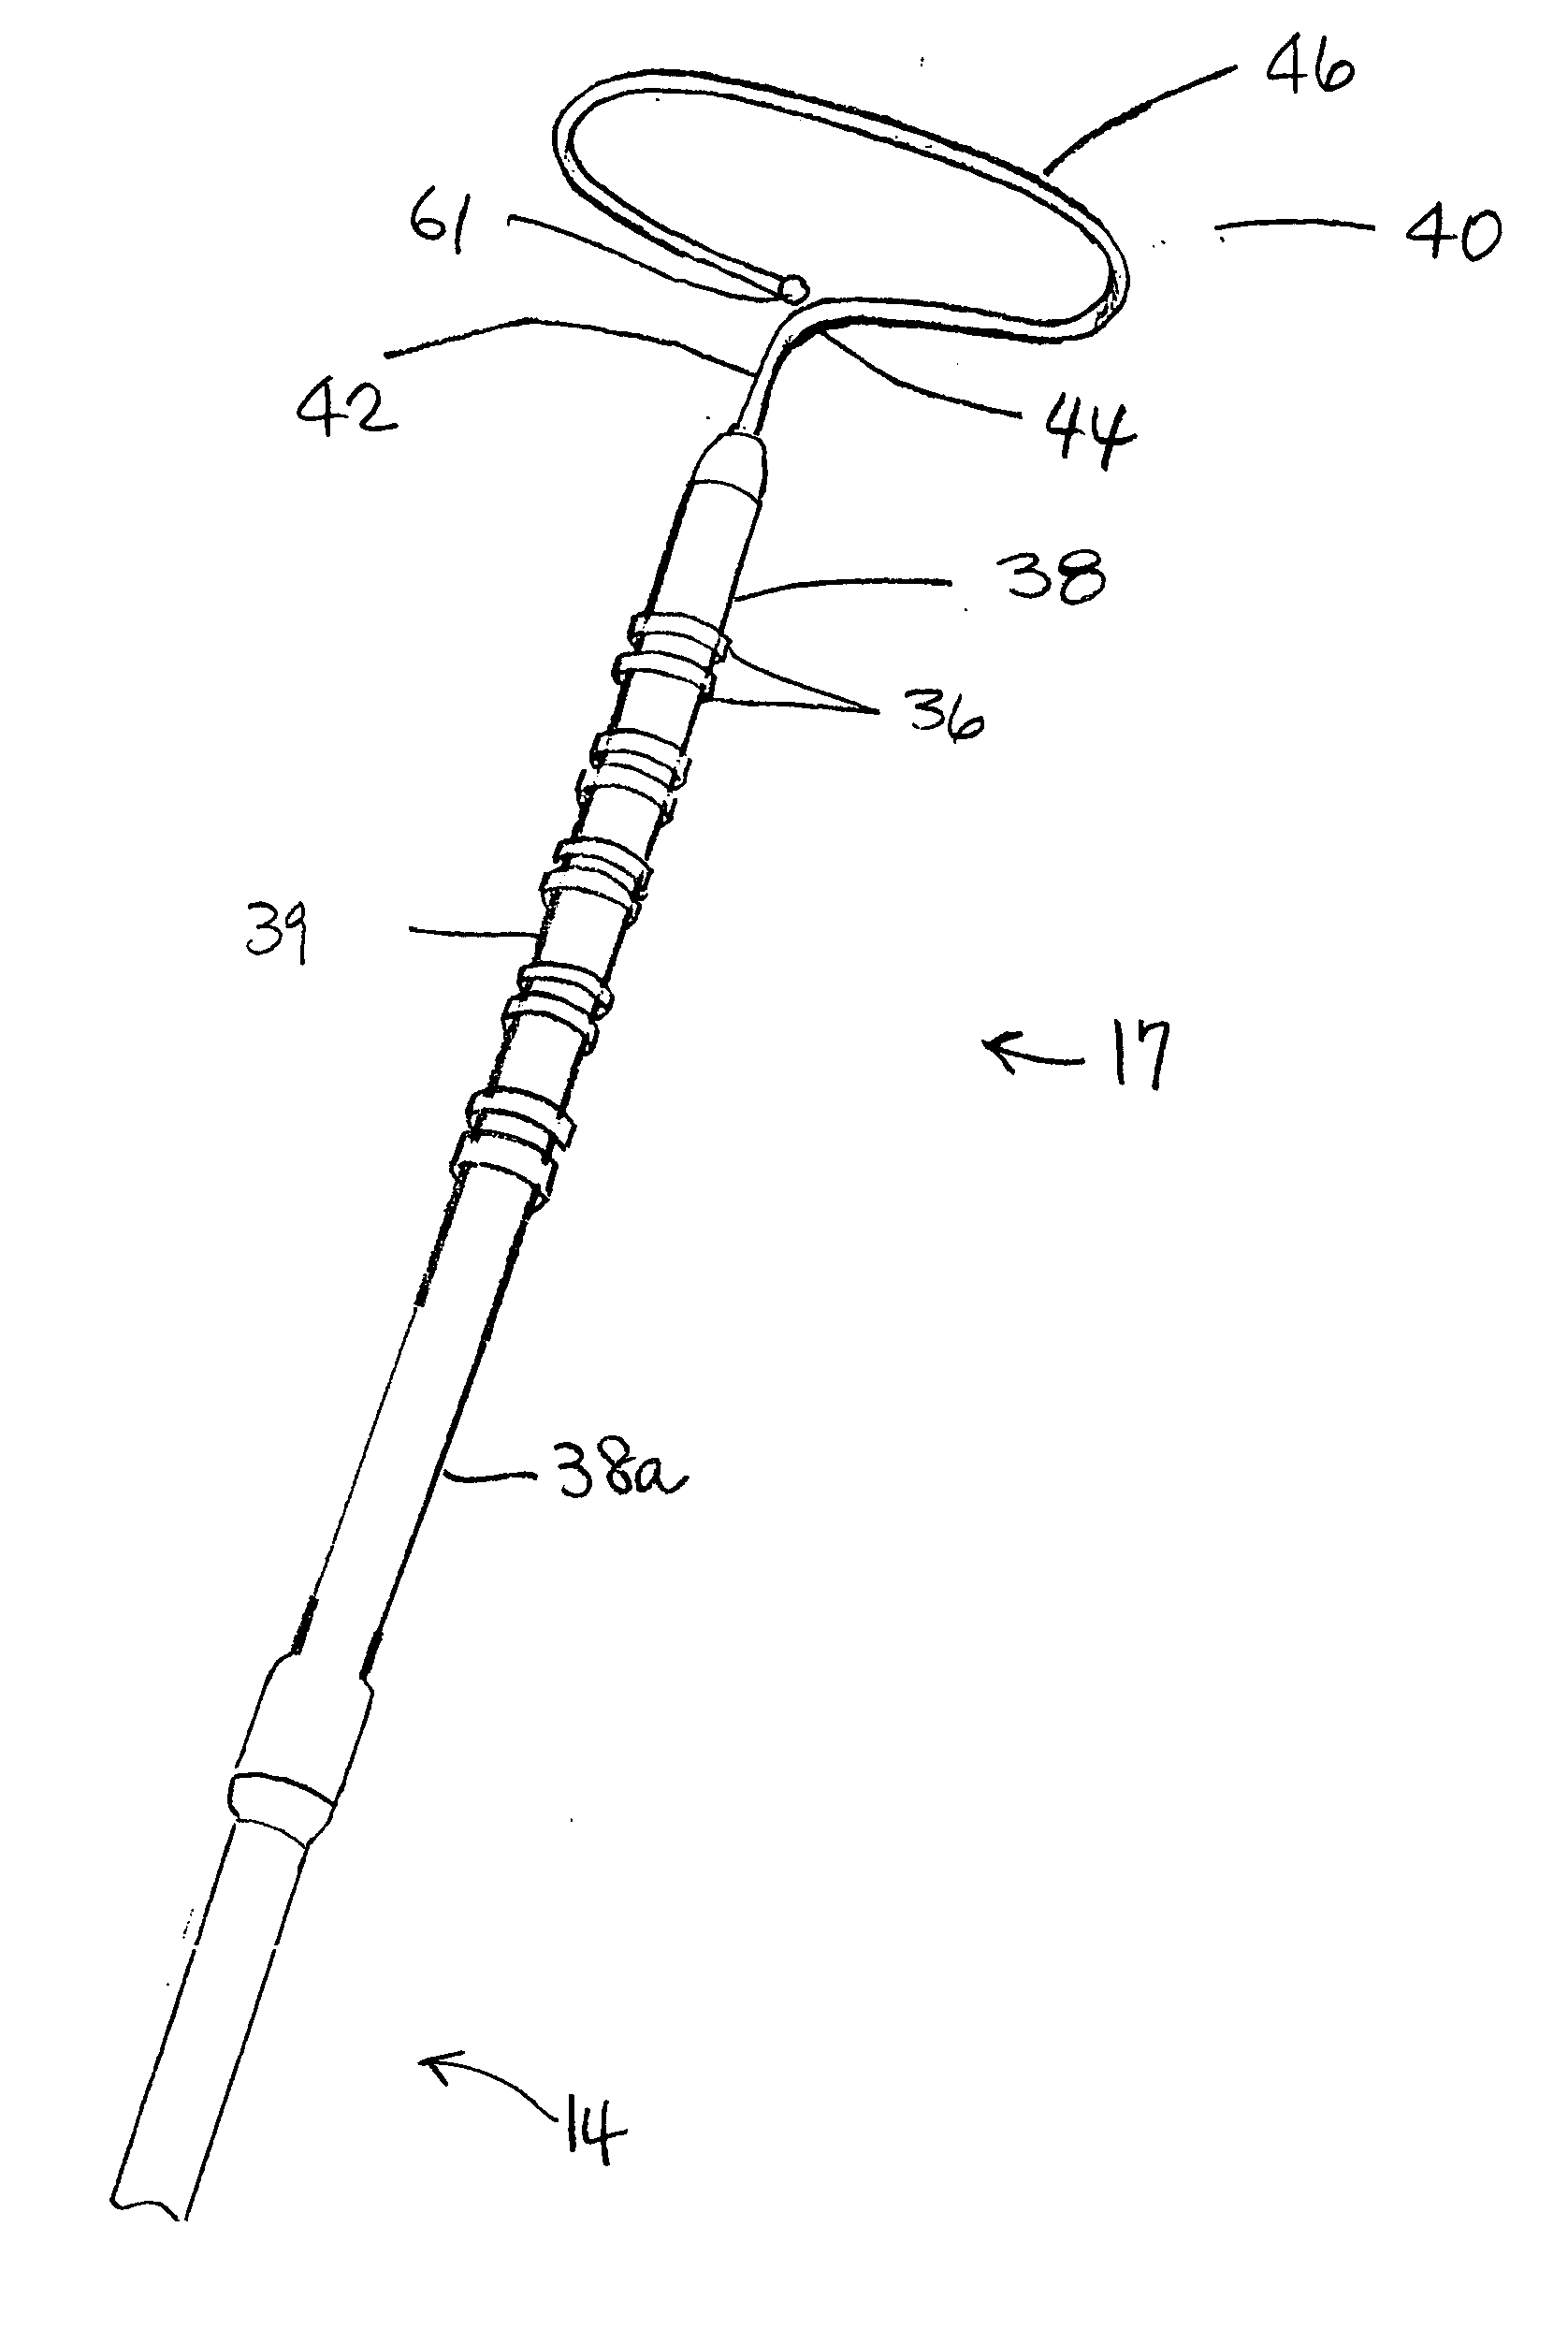 Soft linear mapping catheter with stabilizing tip